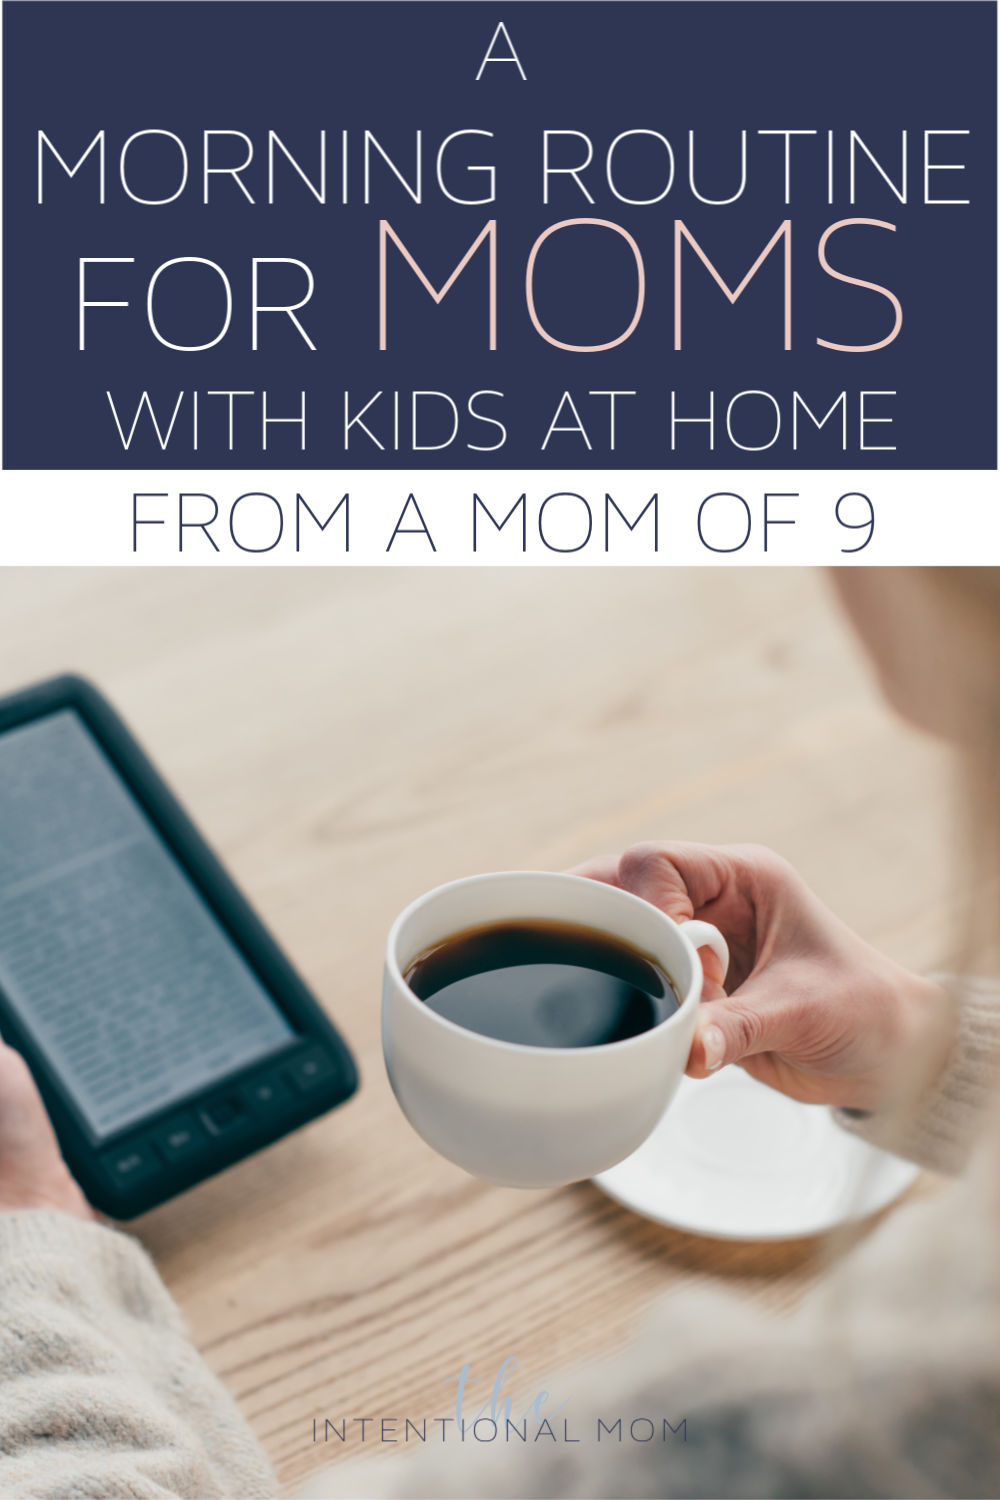 A Morning Routine For Moms With Kids at Home